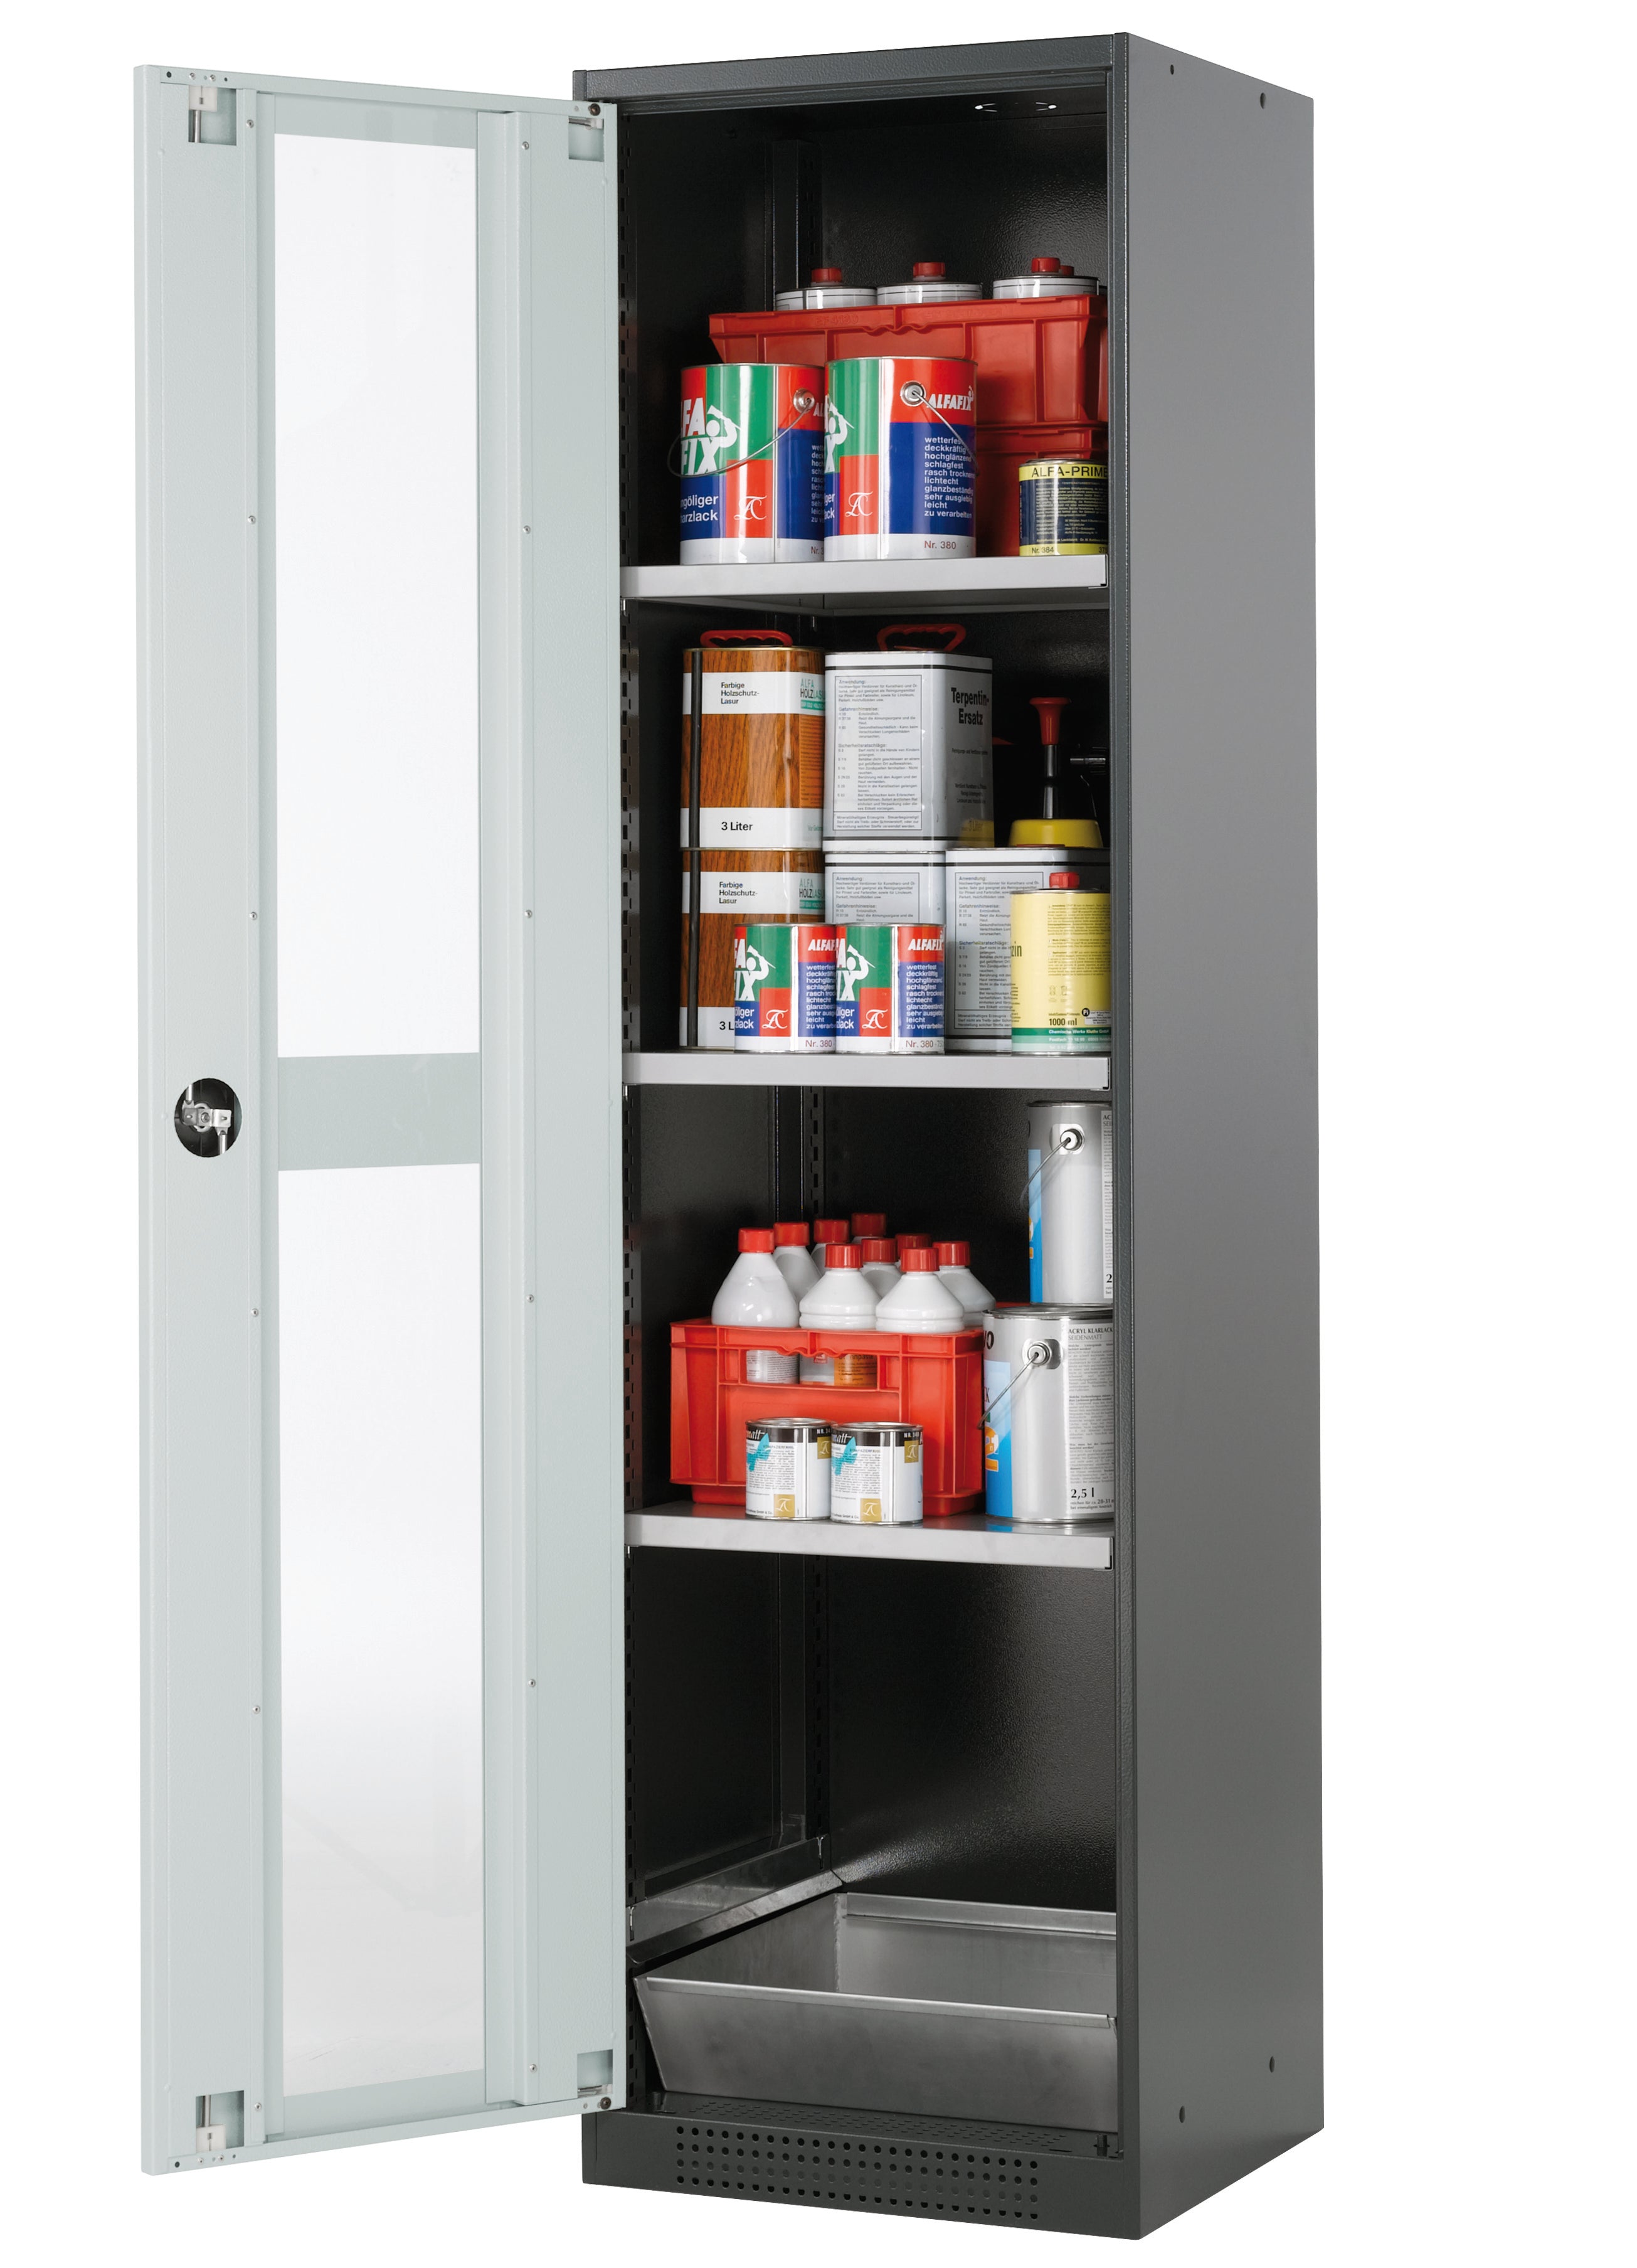 Chemical cabinet CS-CLASSIC-G model CS.195.054.WDFW in light gray RAL 7035 with 3x standard shelves (sheet steel)